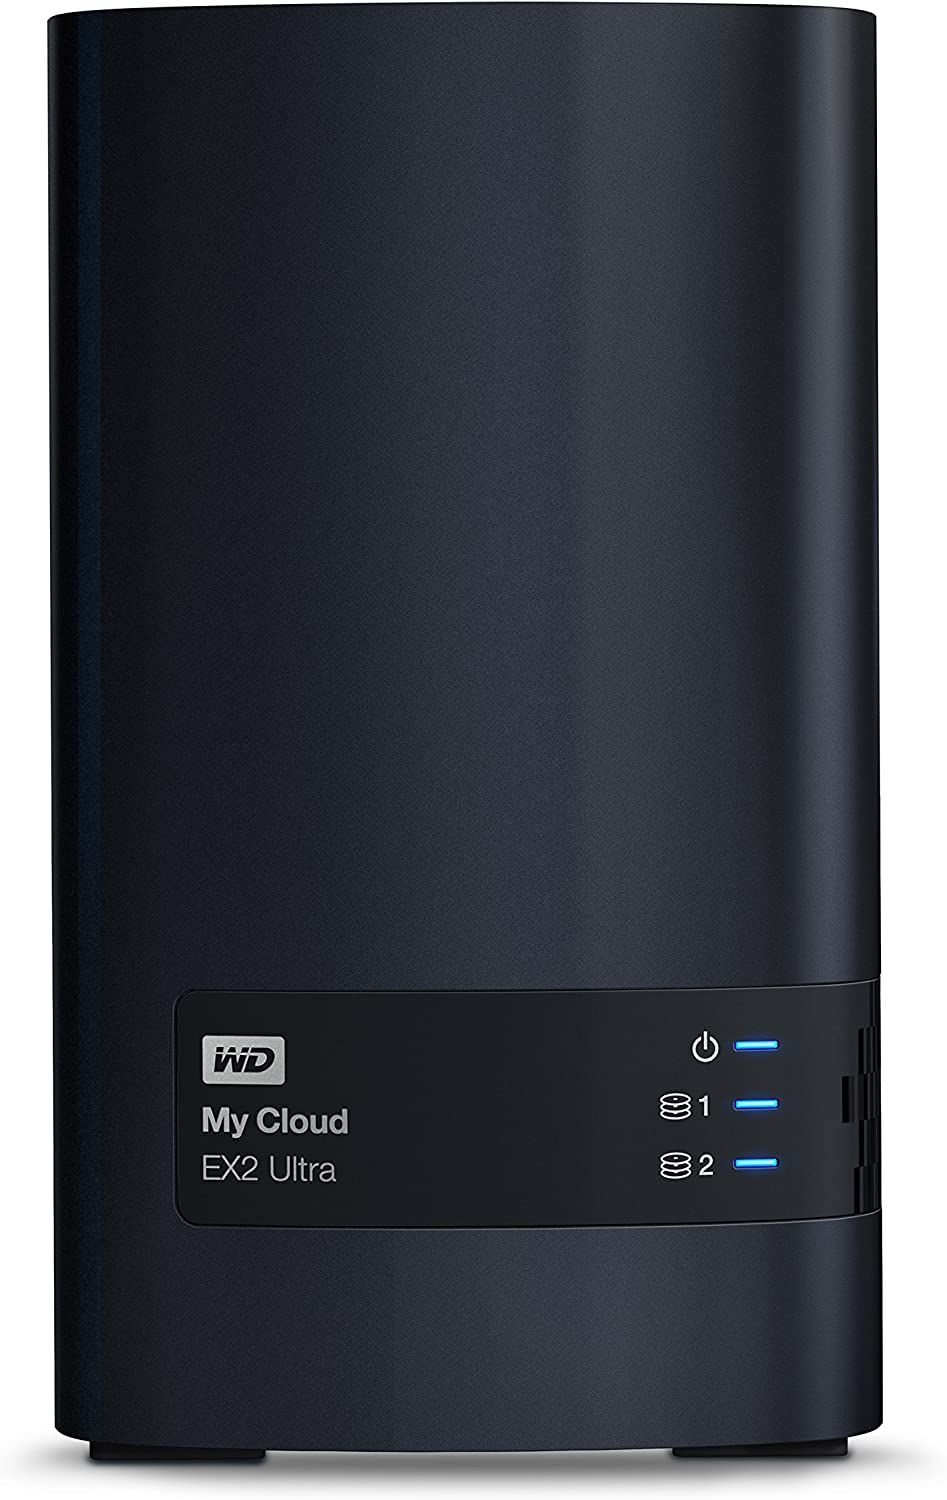 WD My Cloud EX2 Ultra product image of a tall black NAS device with blue lights on the front.